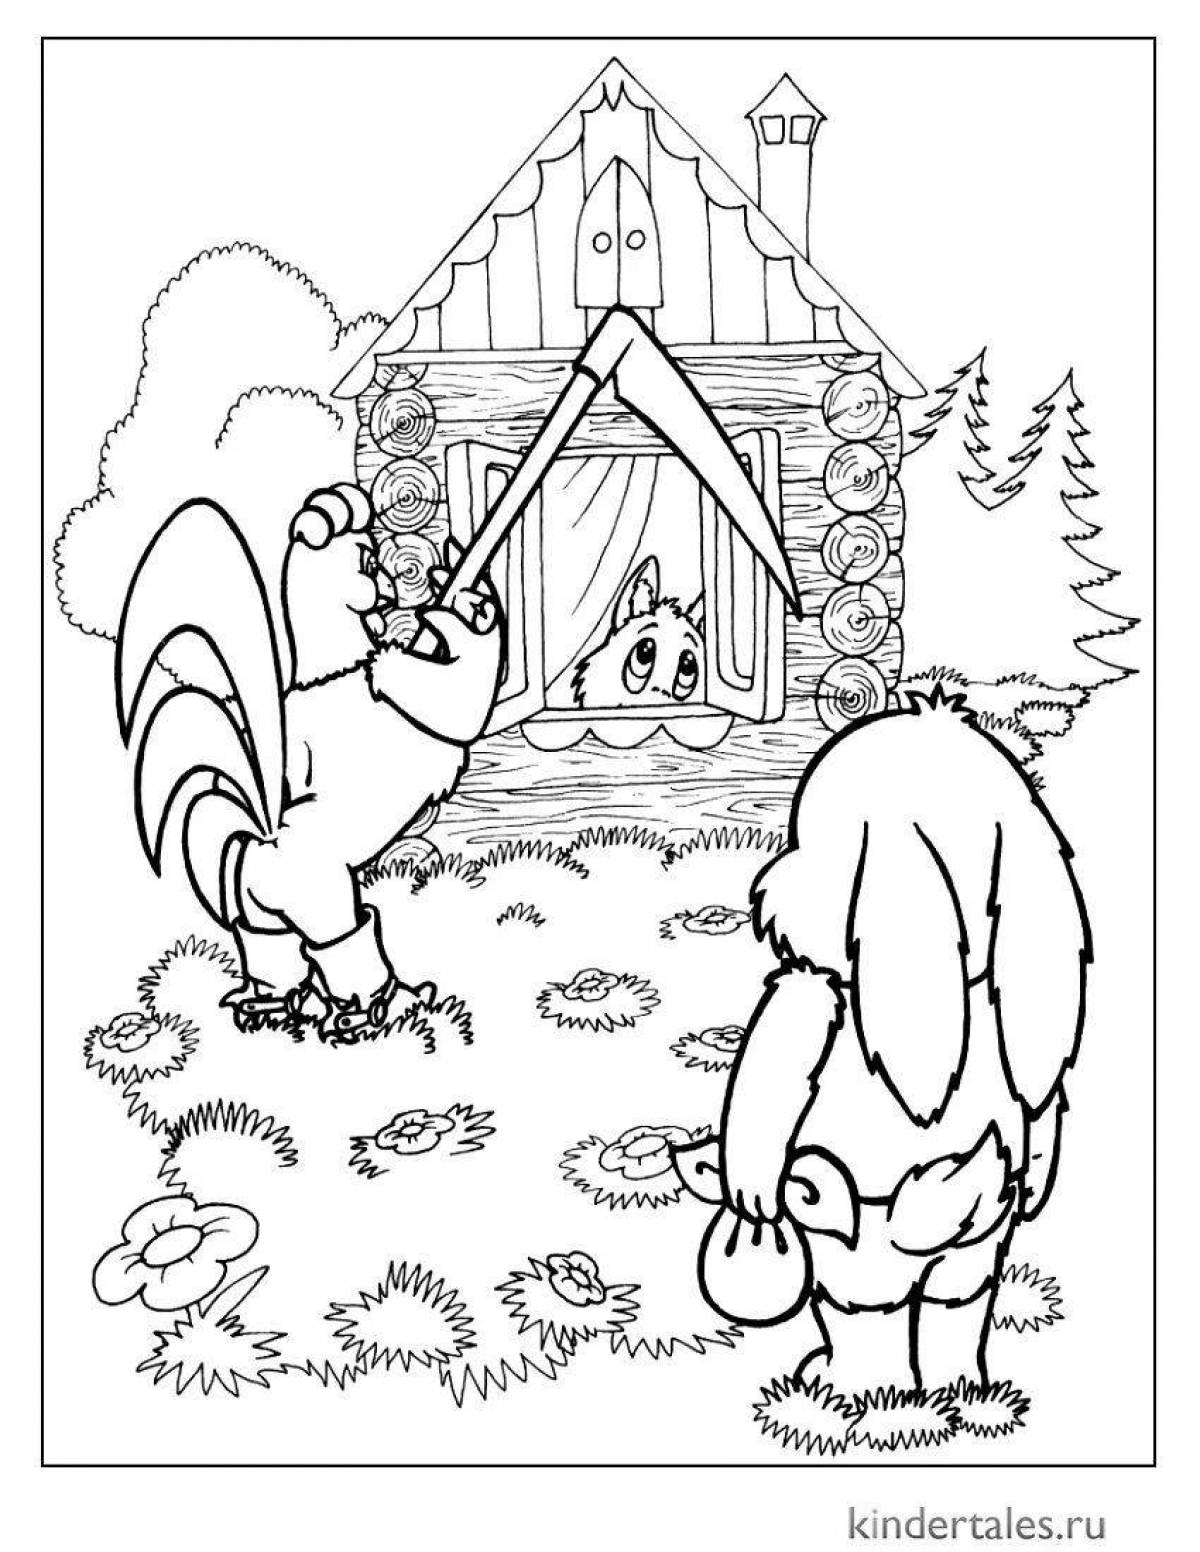 Shiny washcloth and ice hut coloring book